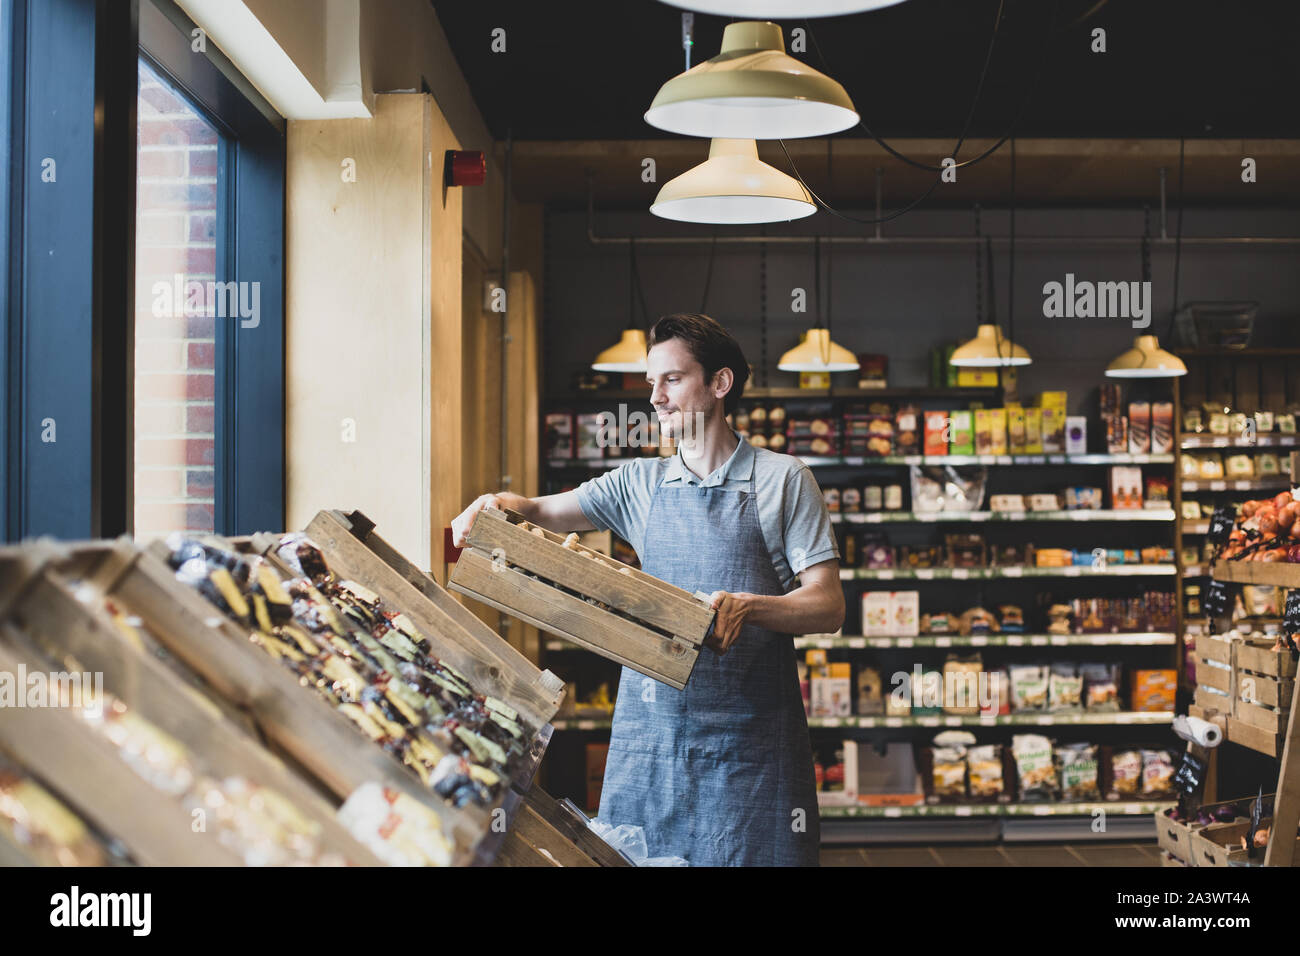 Small business owner of a food market stocking shelves Stock Photo